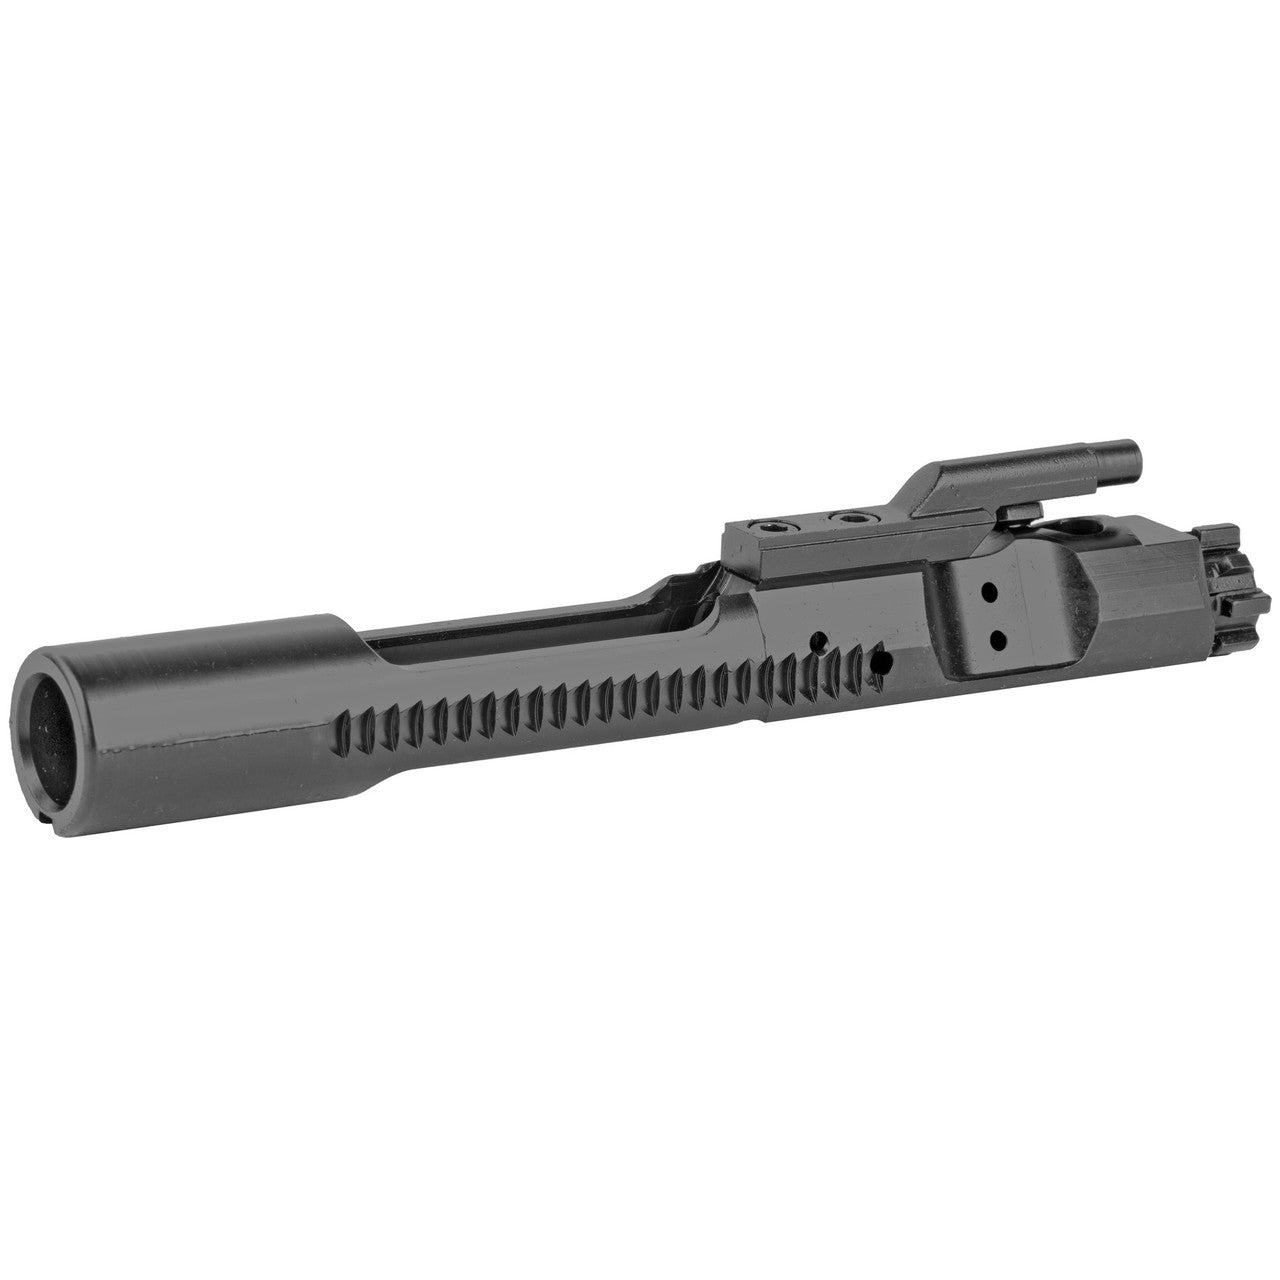 YOUNG MANUFACTURING BOLT CARRIER GROUP/ 5.56 NATO